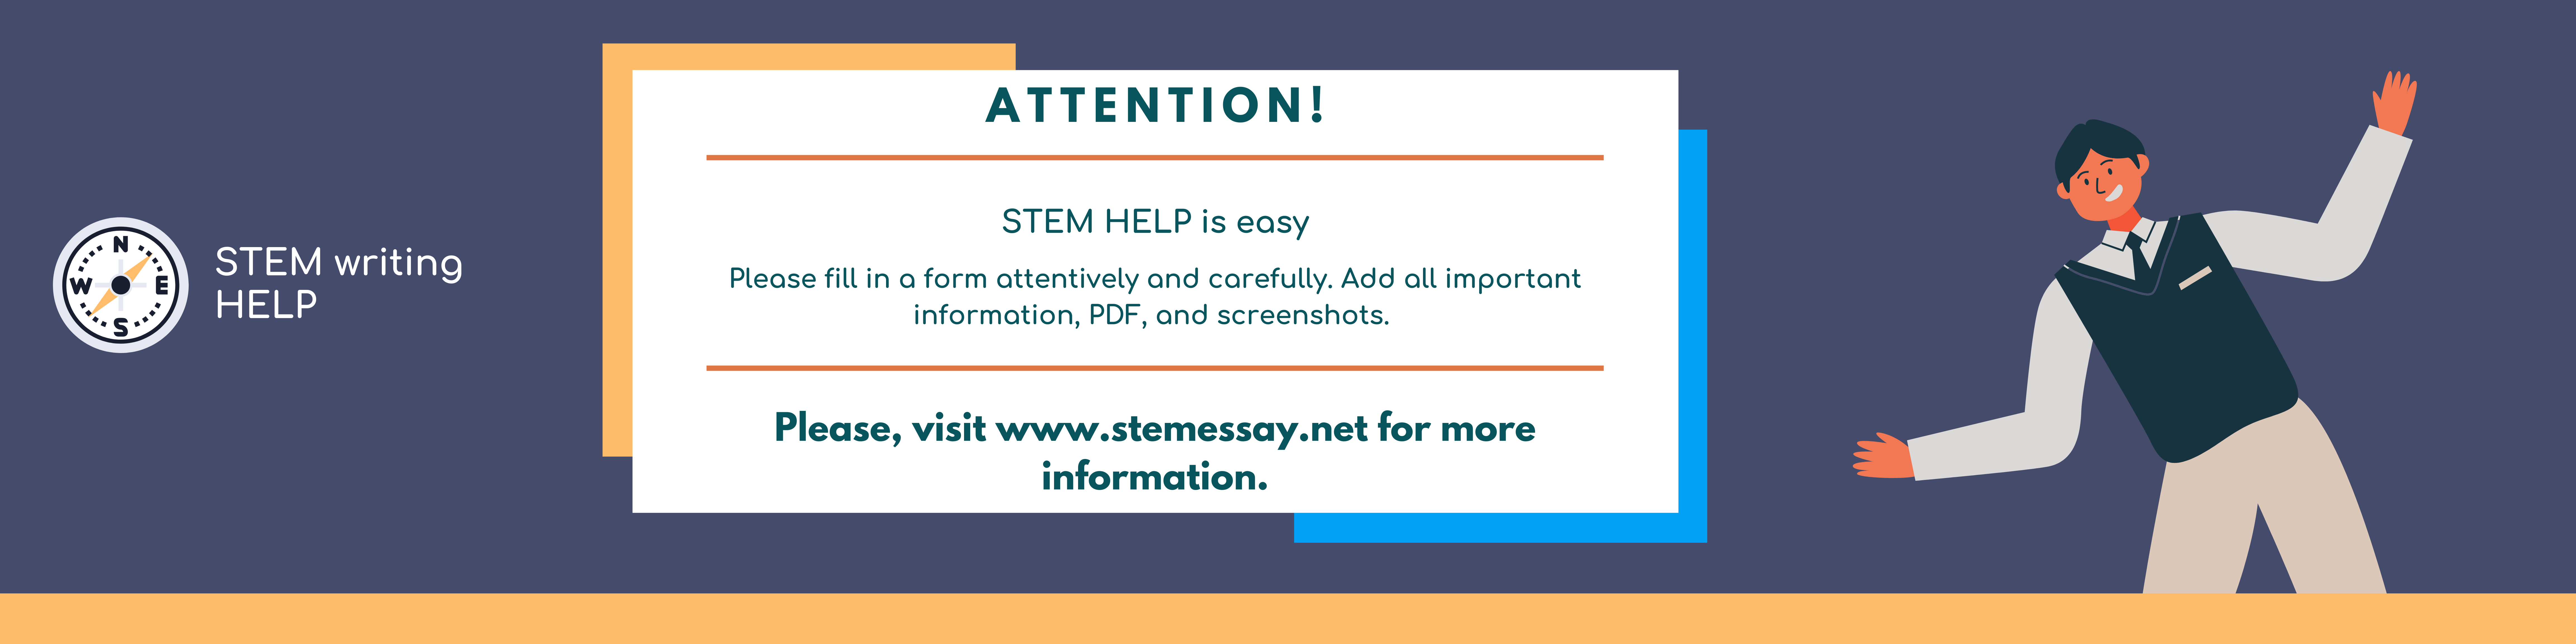 STEM Essay banner for academic help and academic writing help information on STEM papers.